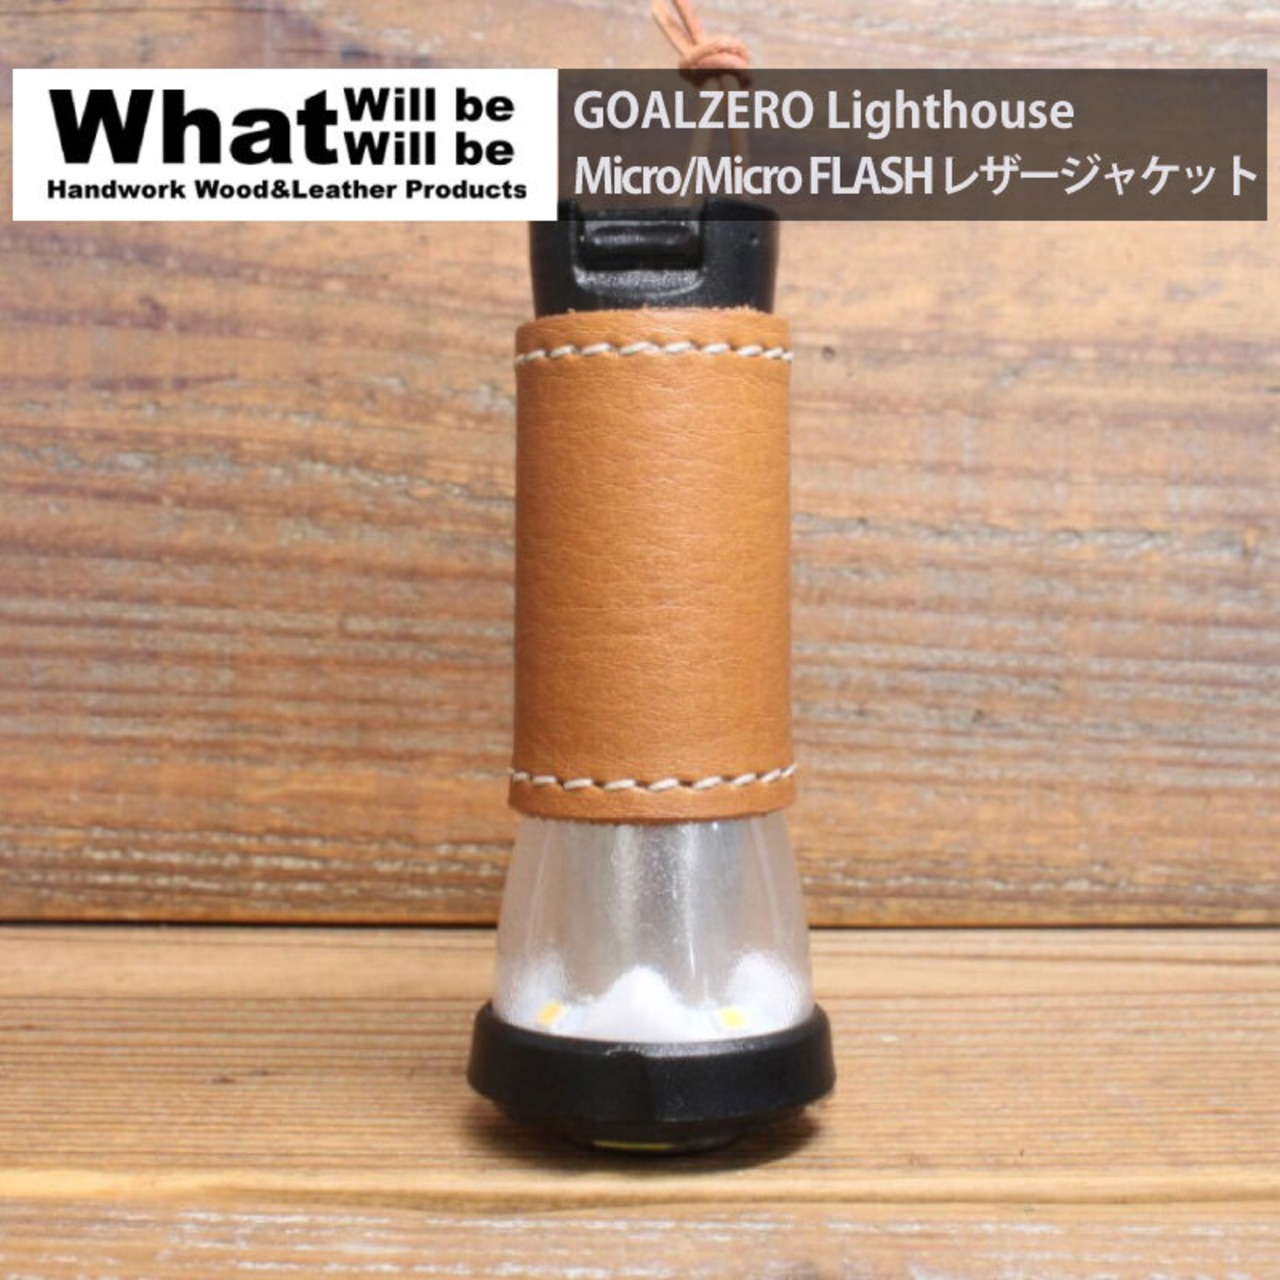 What will be will be GOALZERO Lighthouse Micro/Micro FLASH レザージャケット